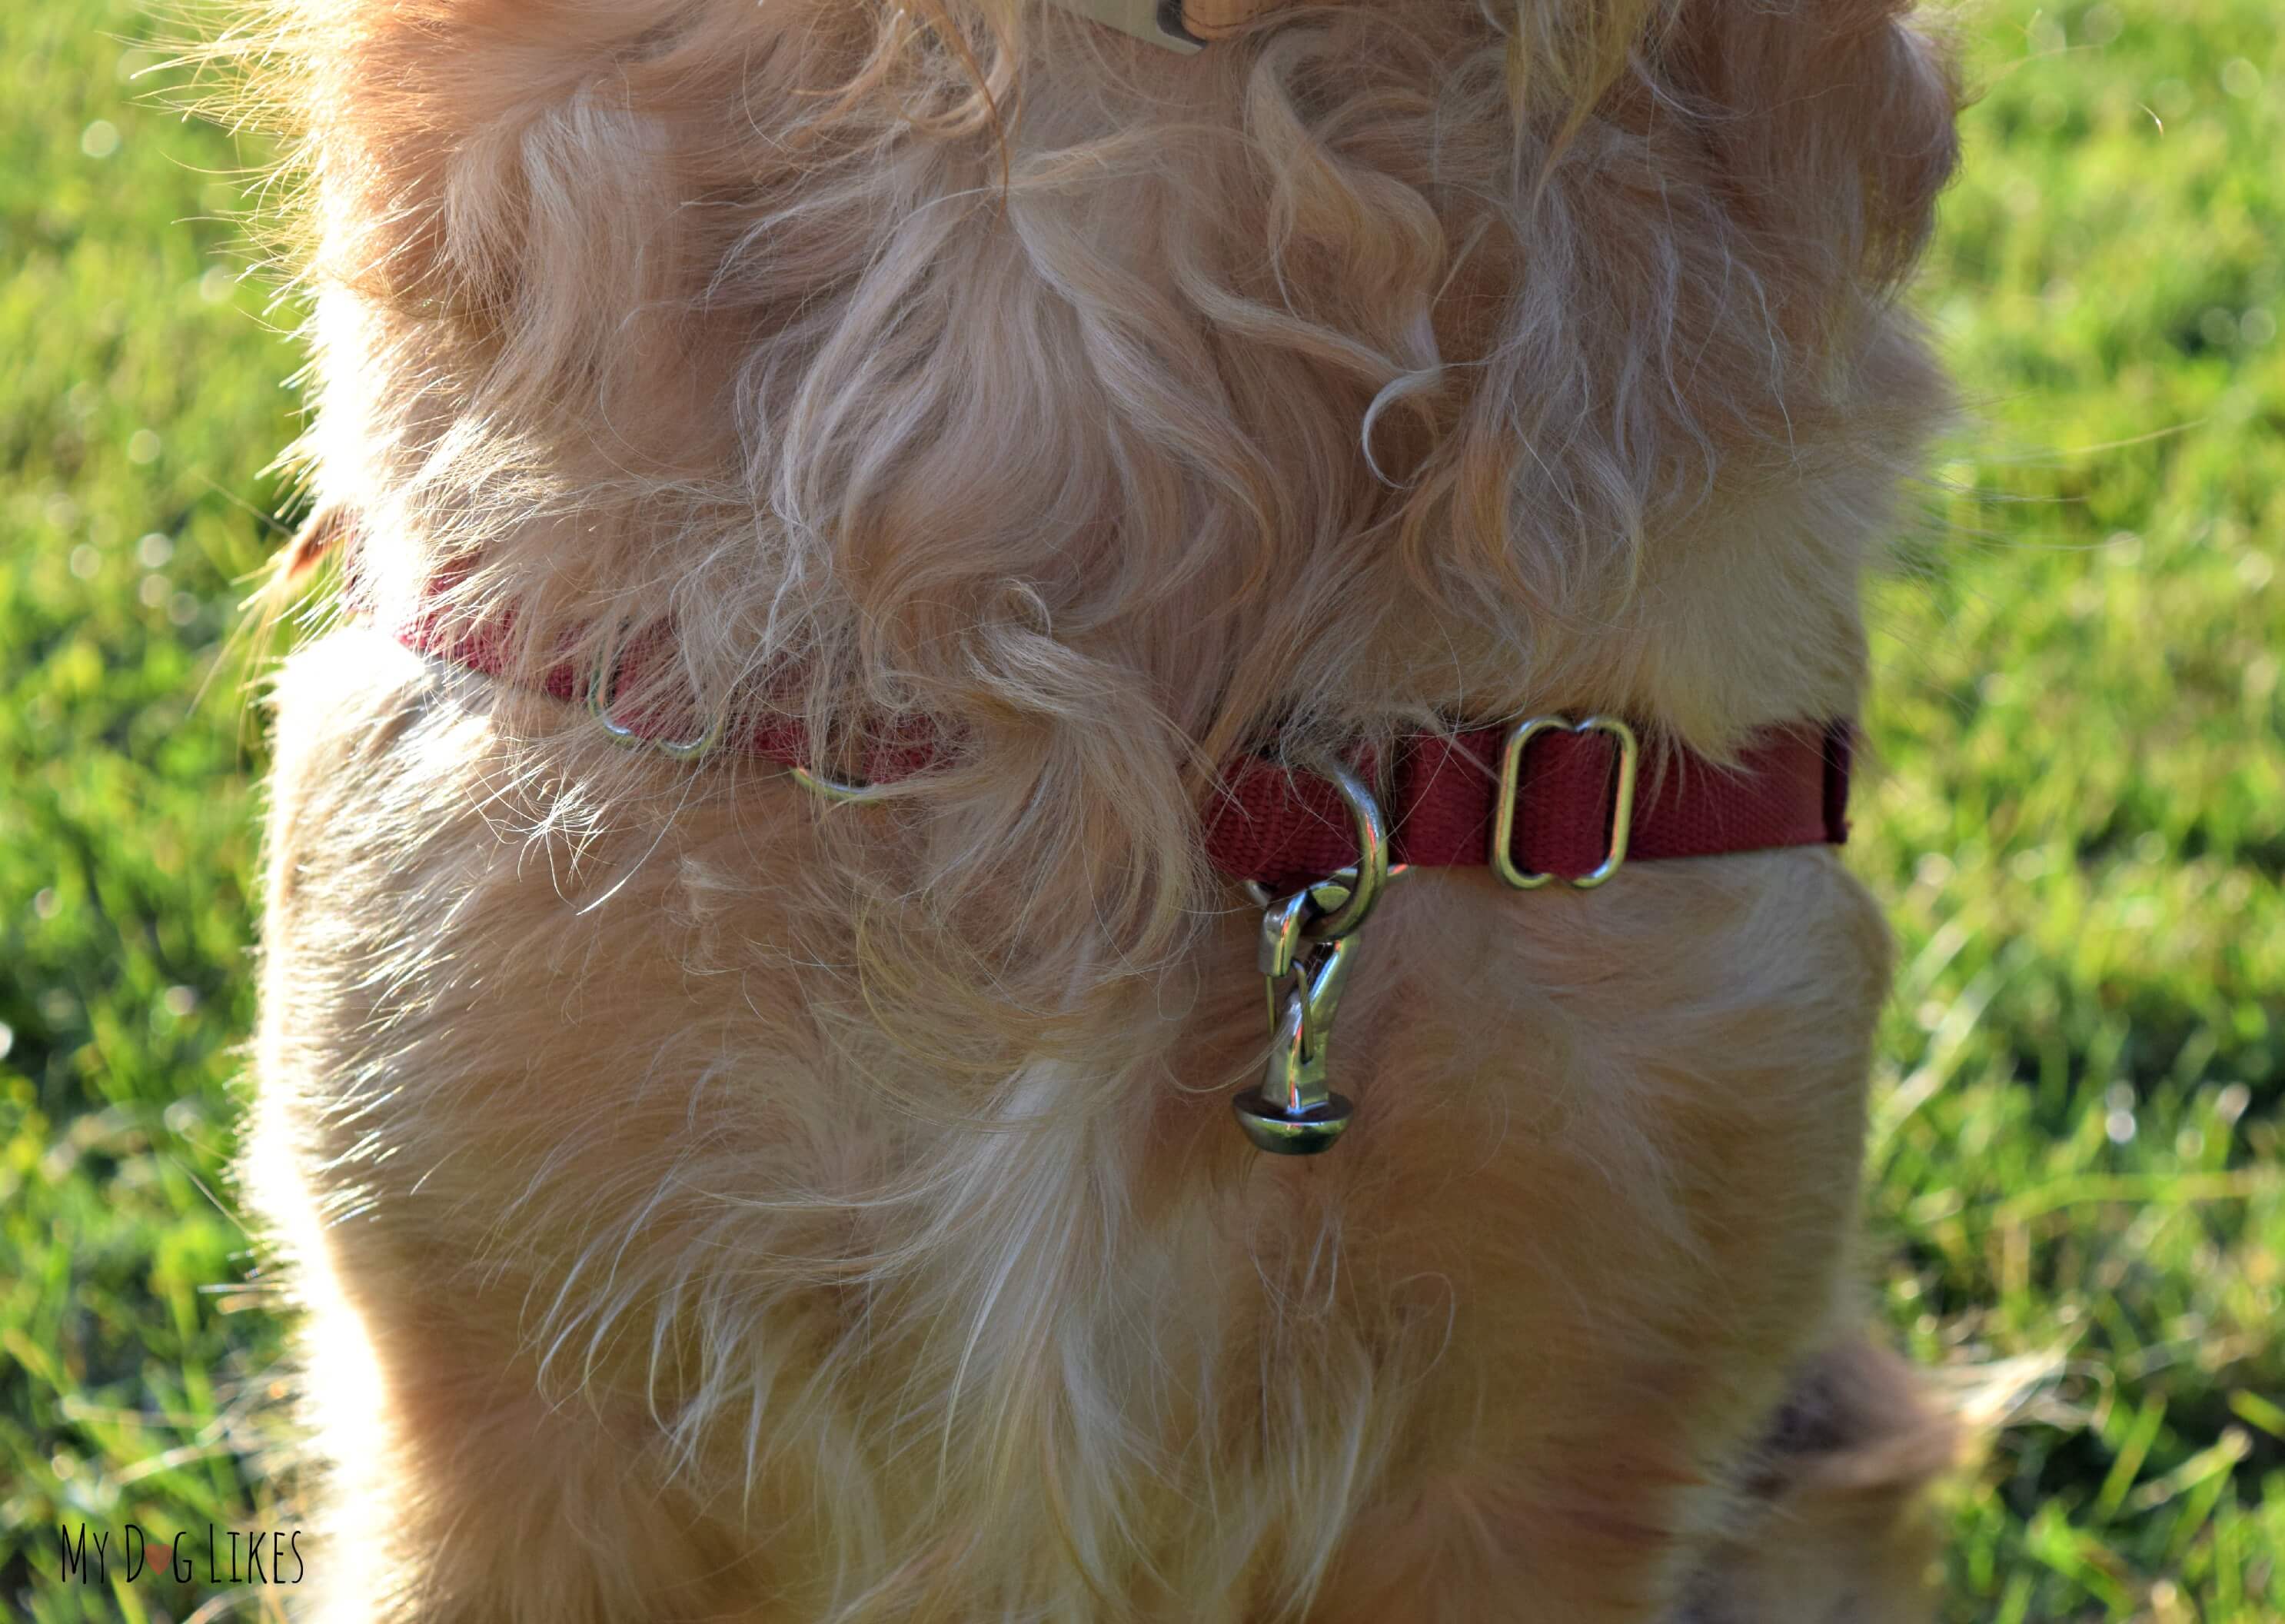 Magic Latch Review - Hands-Free Magnetic Leash and Collar Attachement